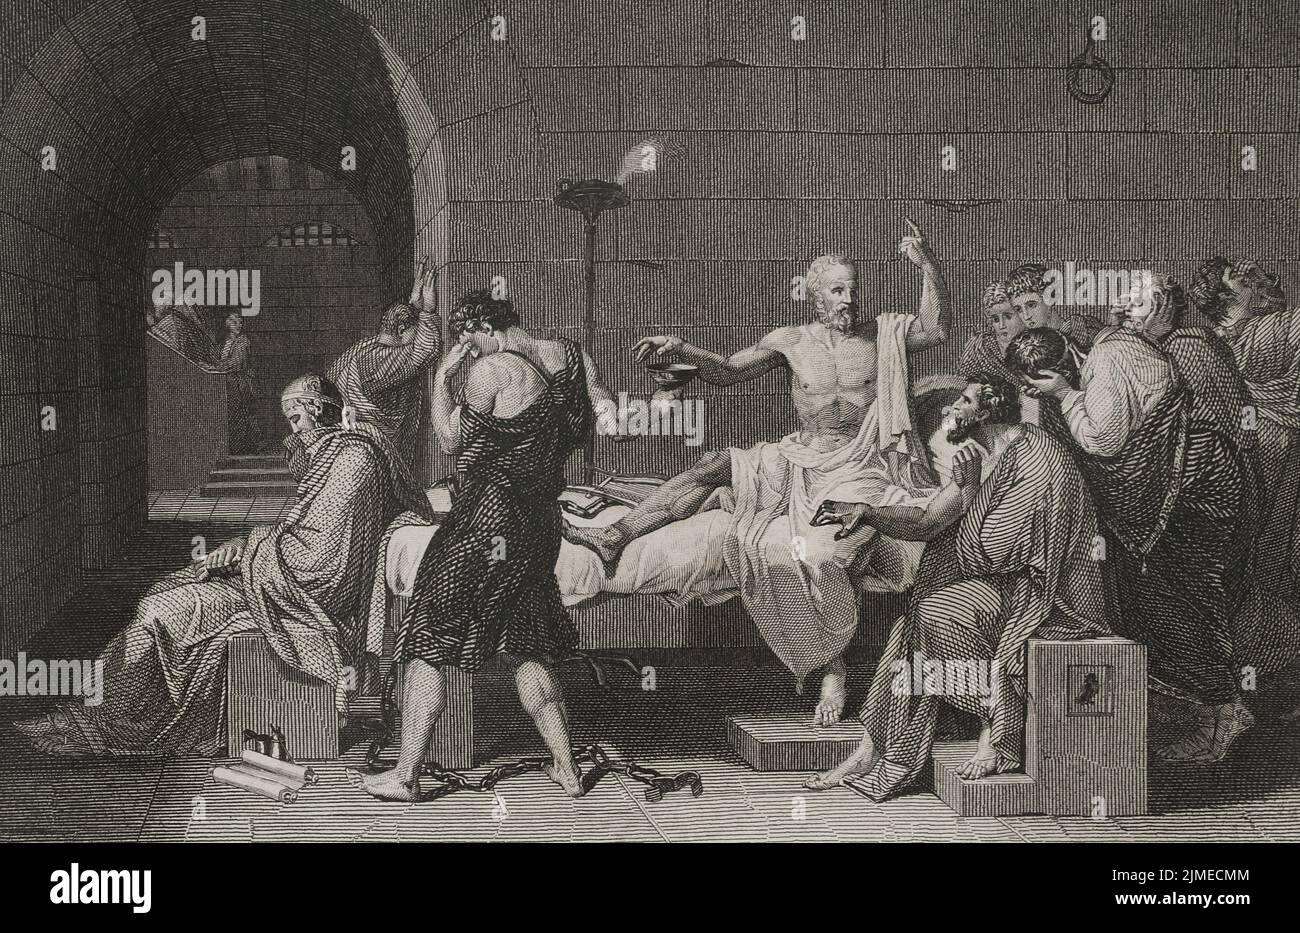 Socrates (ca. 470 BC - 399 BC). Greek philosopher. Accused of corrupting the youth, he was condemned to death by the Heliaia (Supreme Court of Ancient Athens). Death of Socrates. The scene shows Plato seated at the foot of the bed, in a meditative attitude. Engraving by A. Roca, based on the painting by Jacques-Louis David. 'Historia Universal', by César Cantú. Volume I, 1854. Author: Antonio Roca Sallent (1813-1864). Spanish engraver. Stock Photo